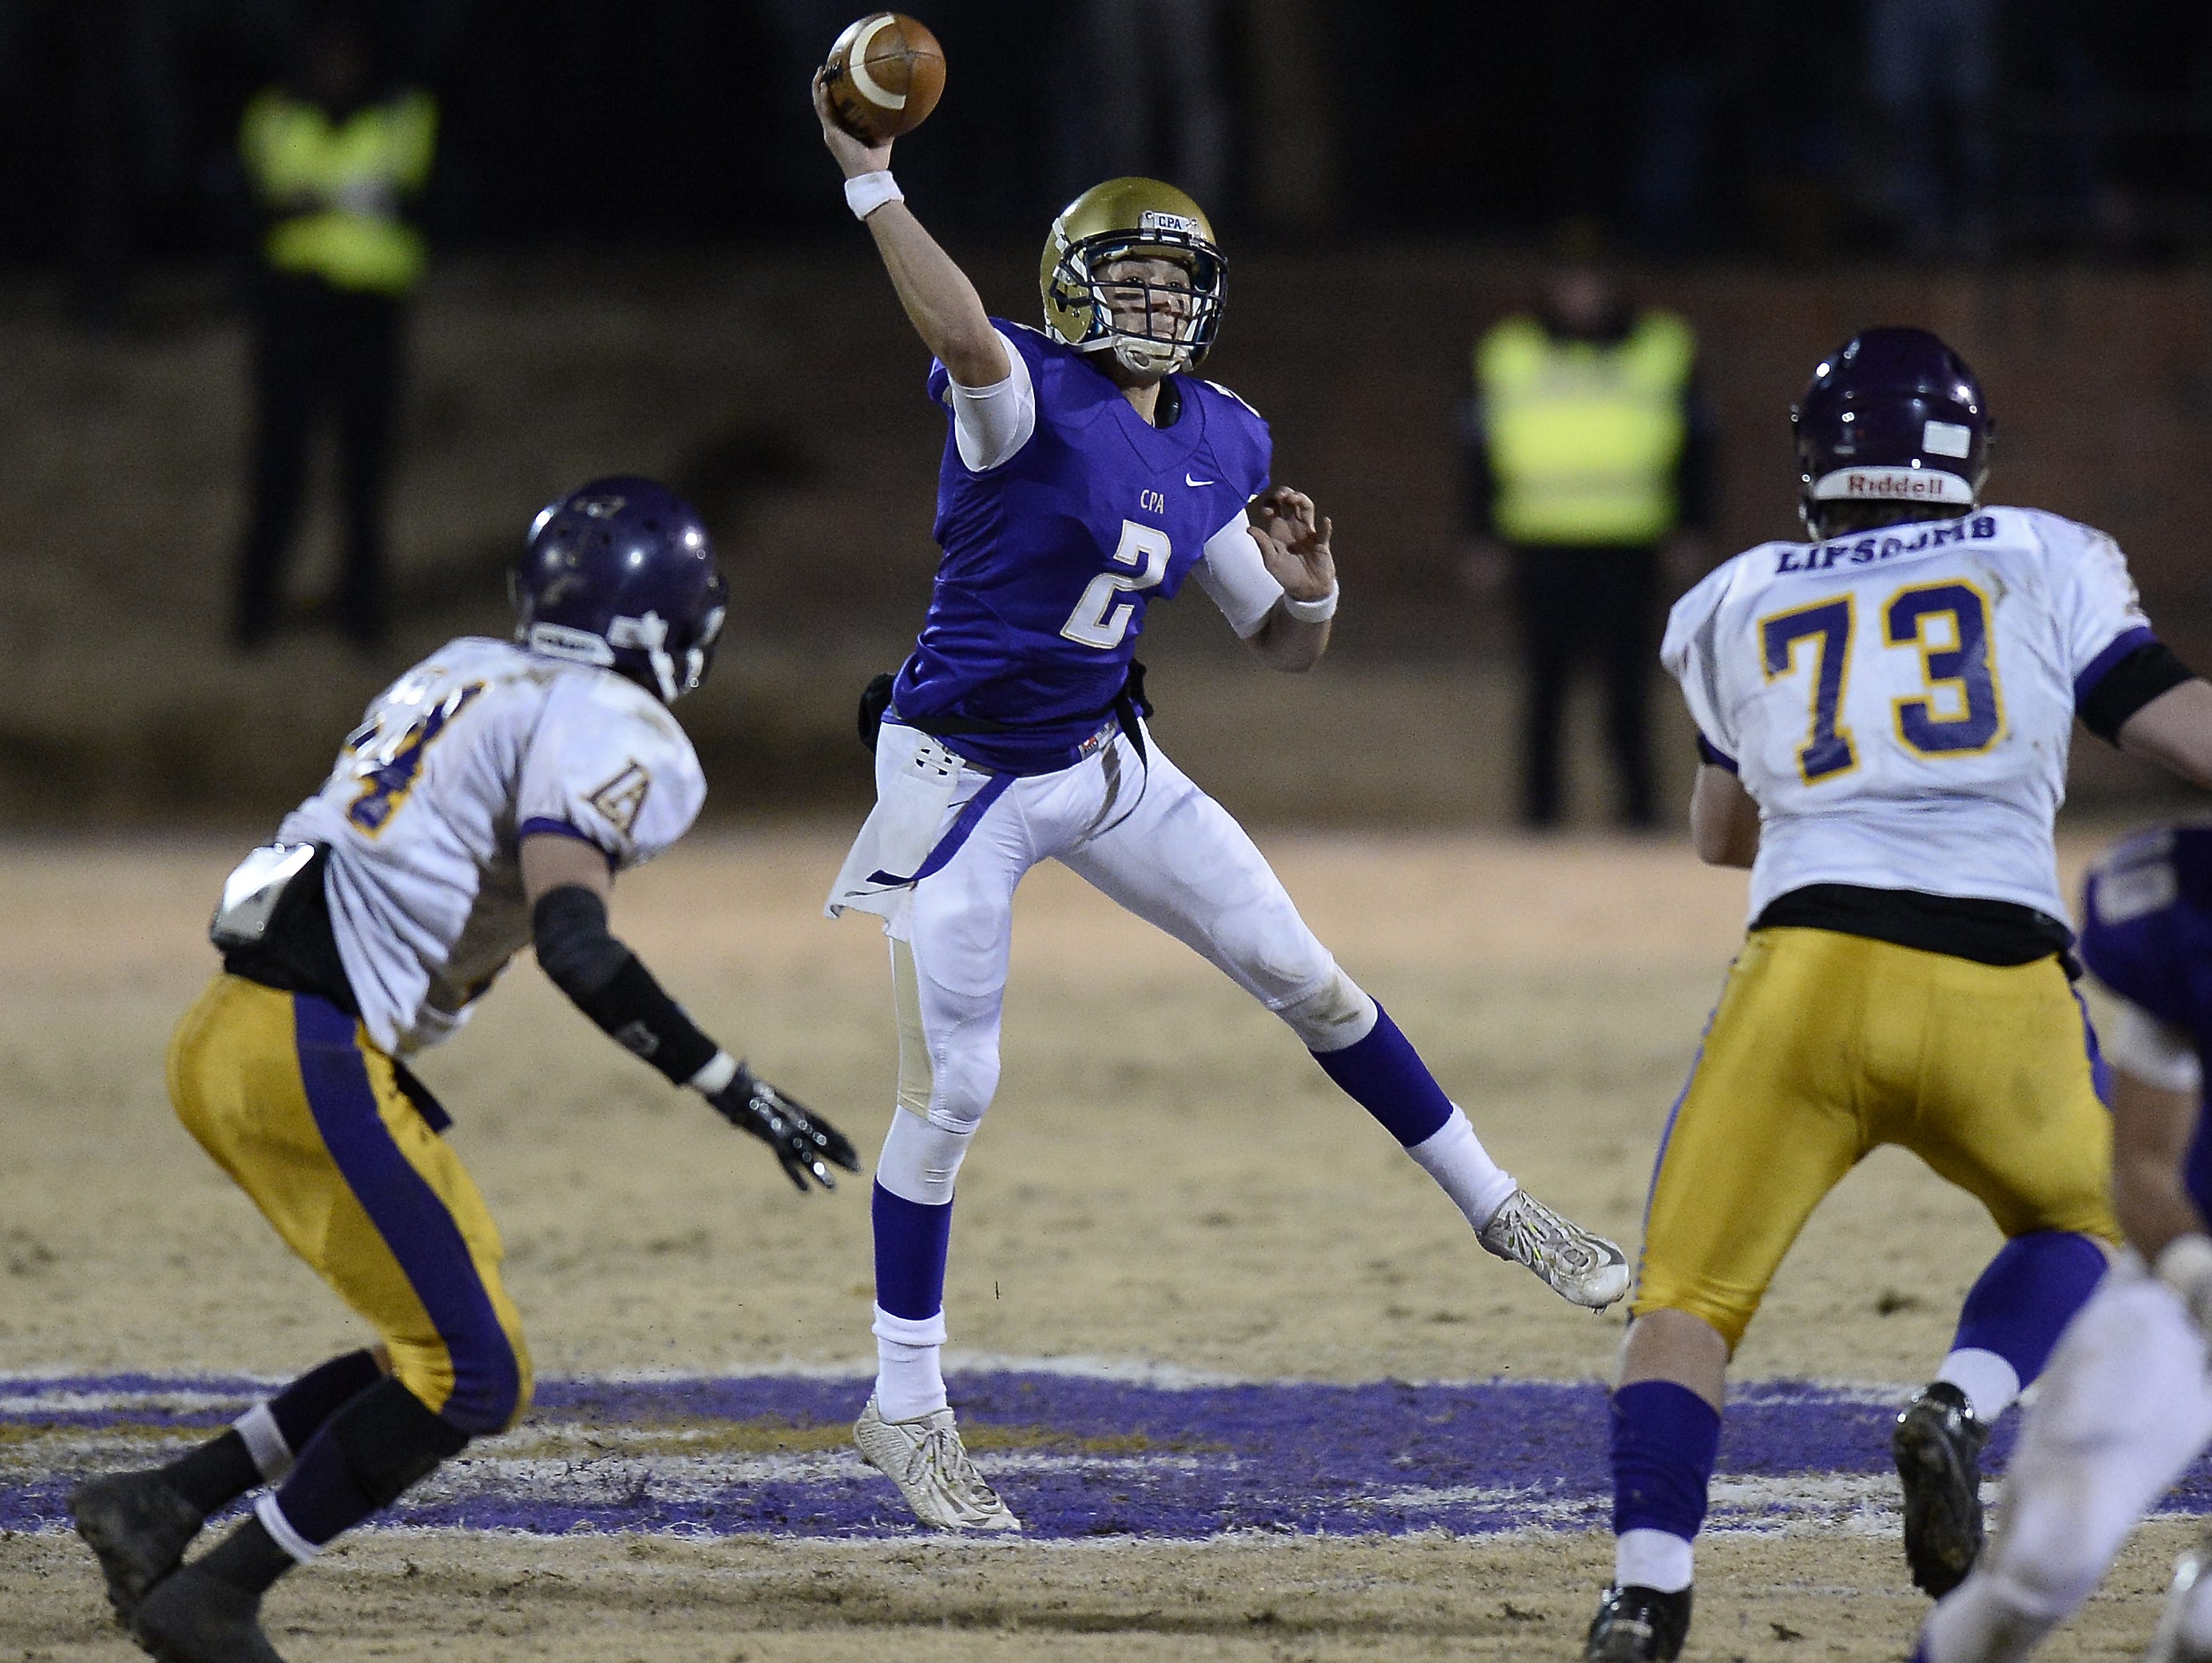 CPA quarterback Zack Weatherly (2) attempts a pass during a contest last season.